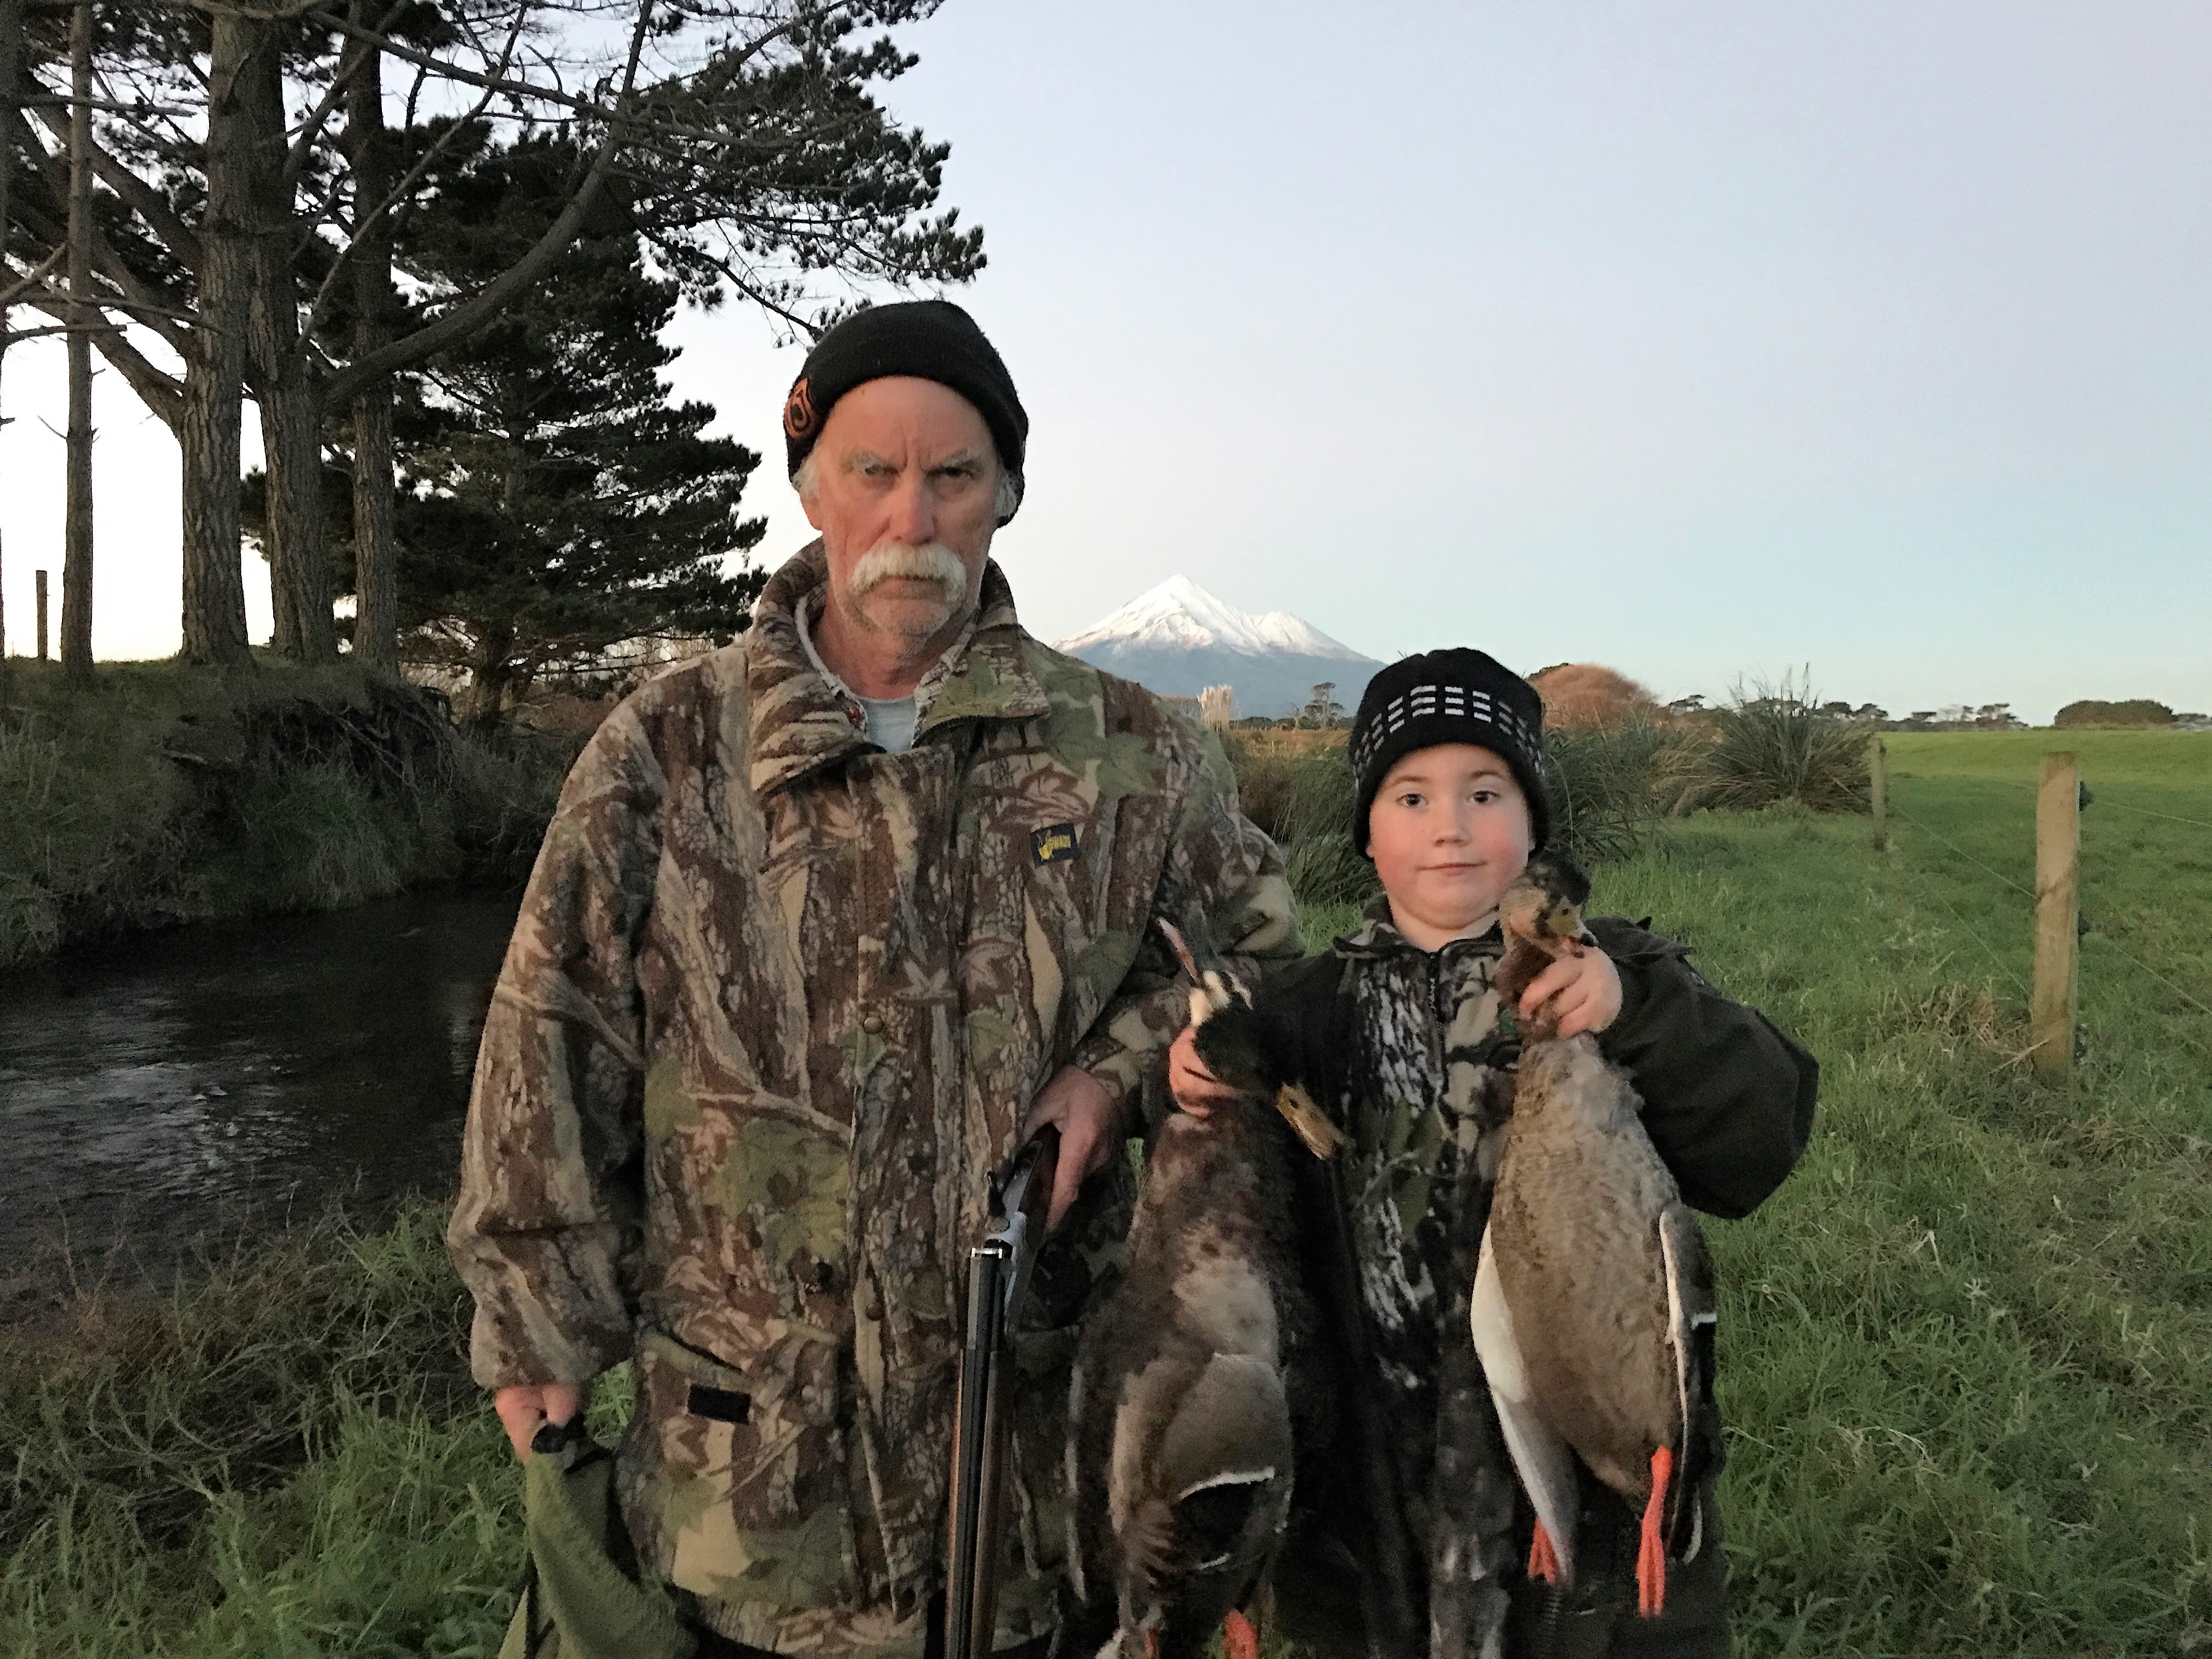 Taranki BBAug2017. Murray Dobbin and grandson Wyatt with the results of a successful shoot during the 2017 game season